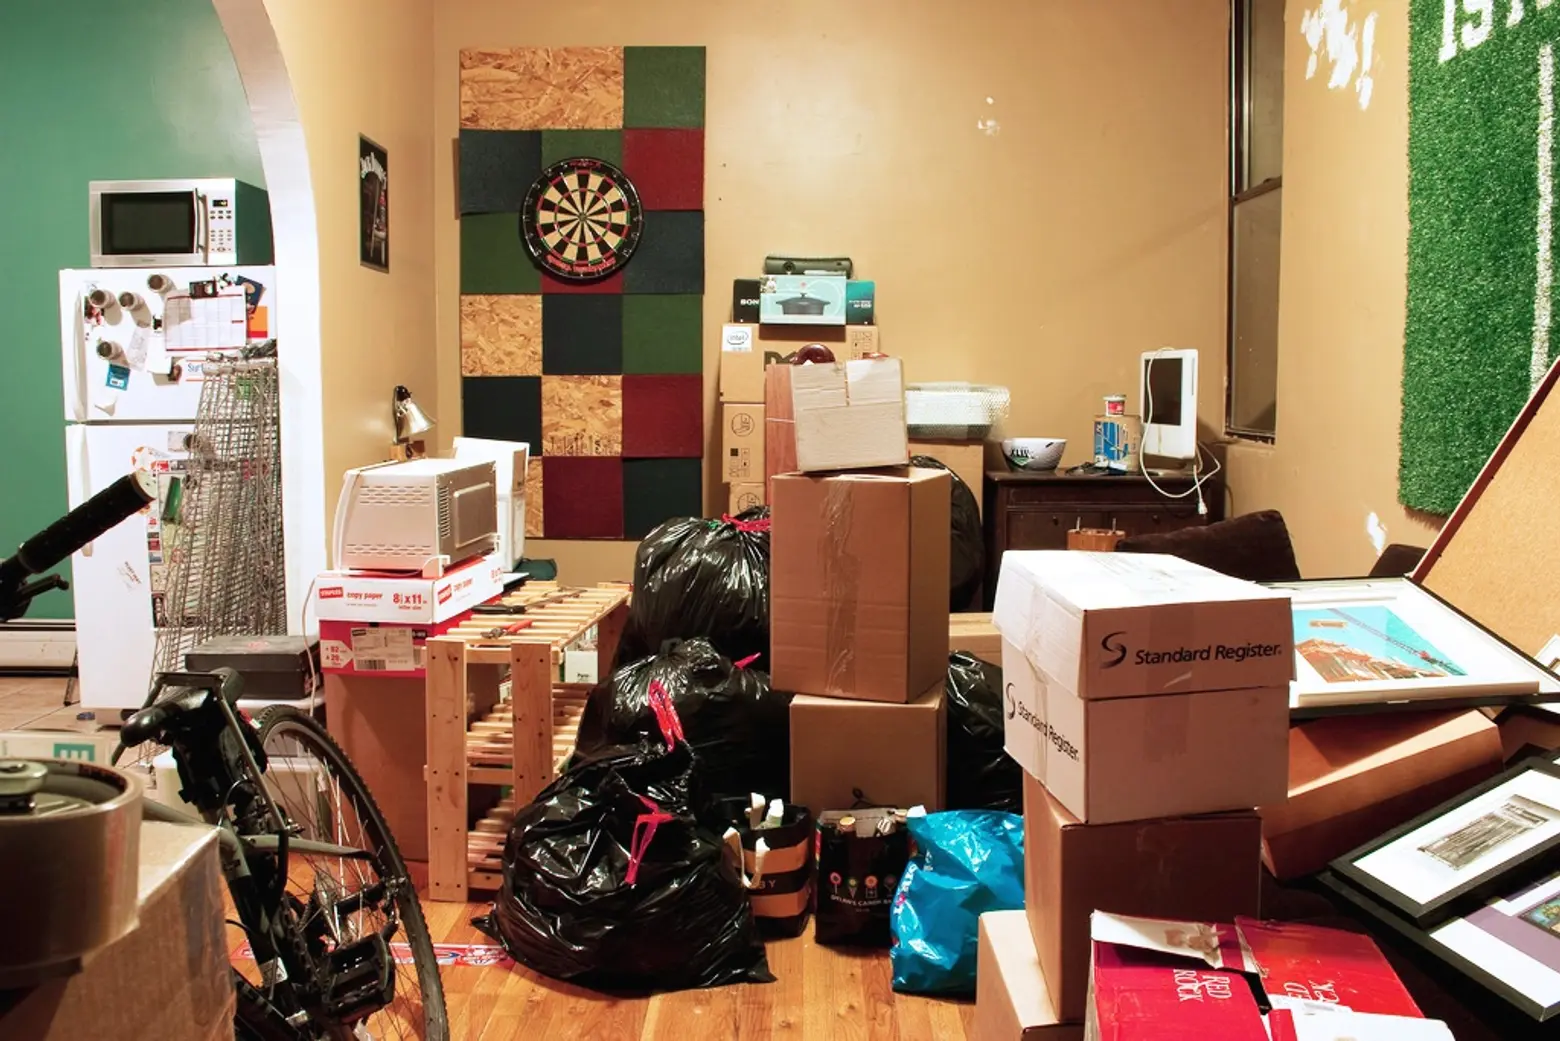 6sqft Guide: Everything parents need to know about renting for college-age kids in NYC